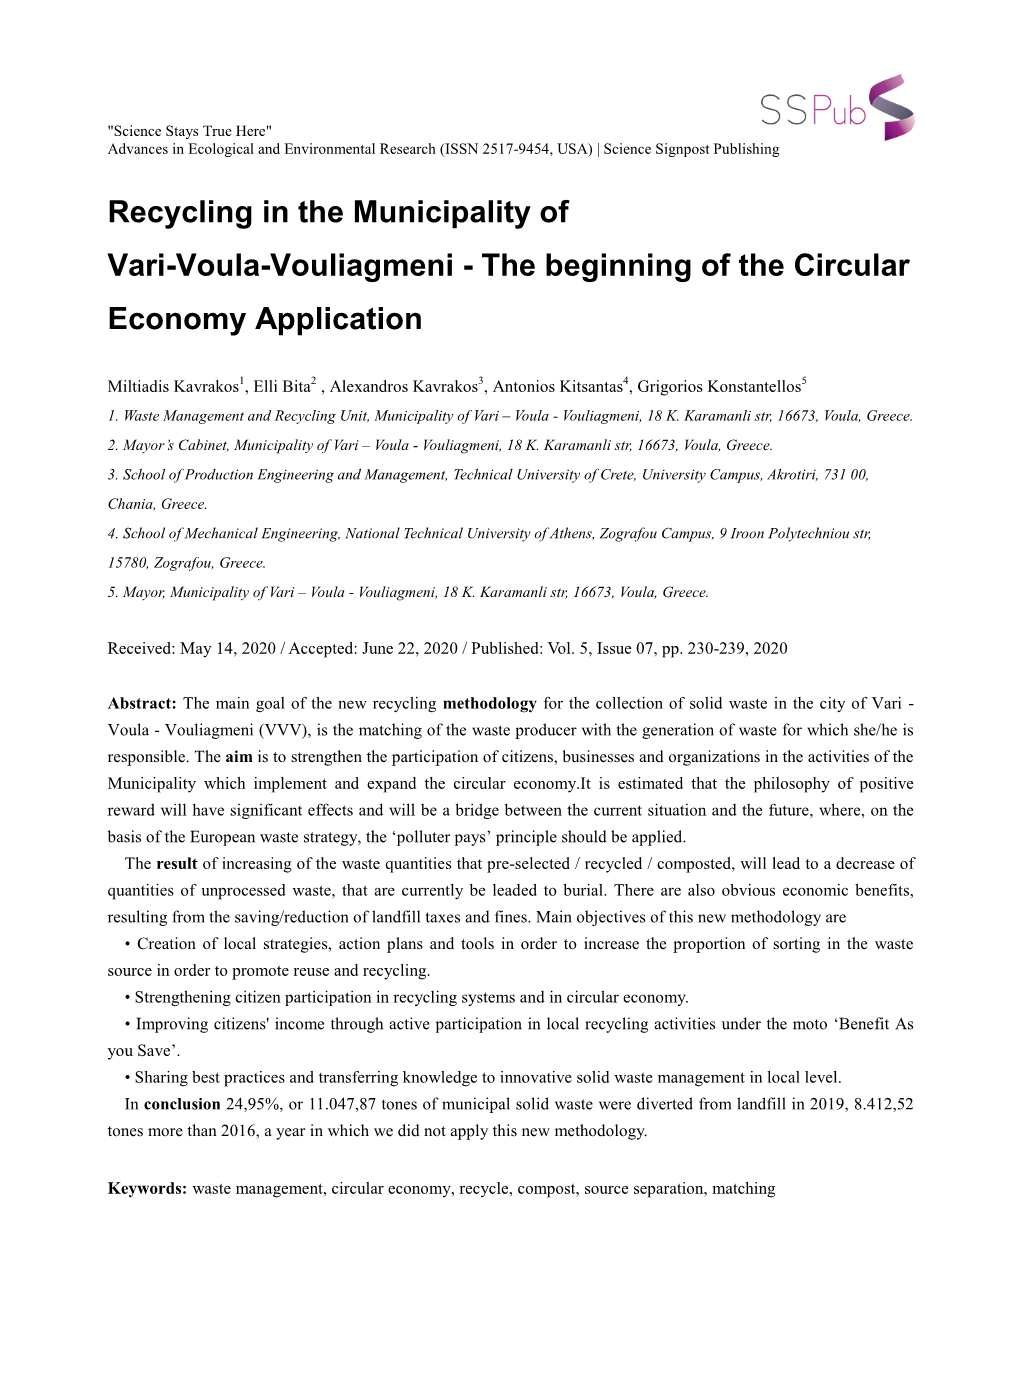 Recycling in the Municipality of Vari-Voula-Vouliagmeni - the Beginning of the Circular Economy Application